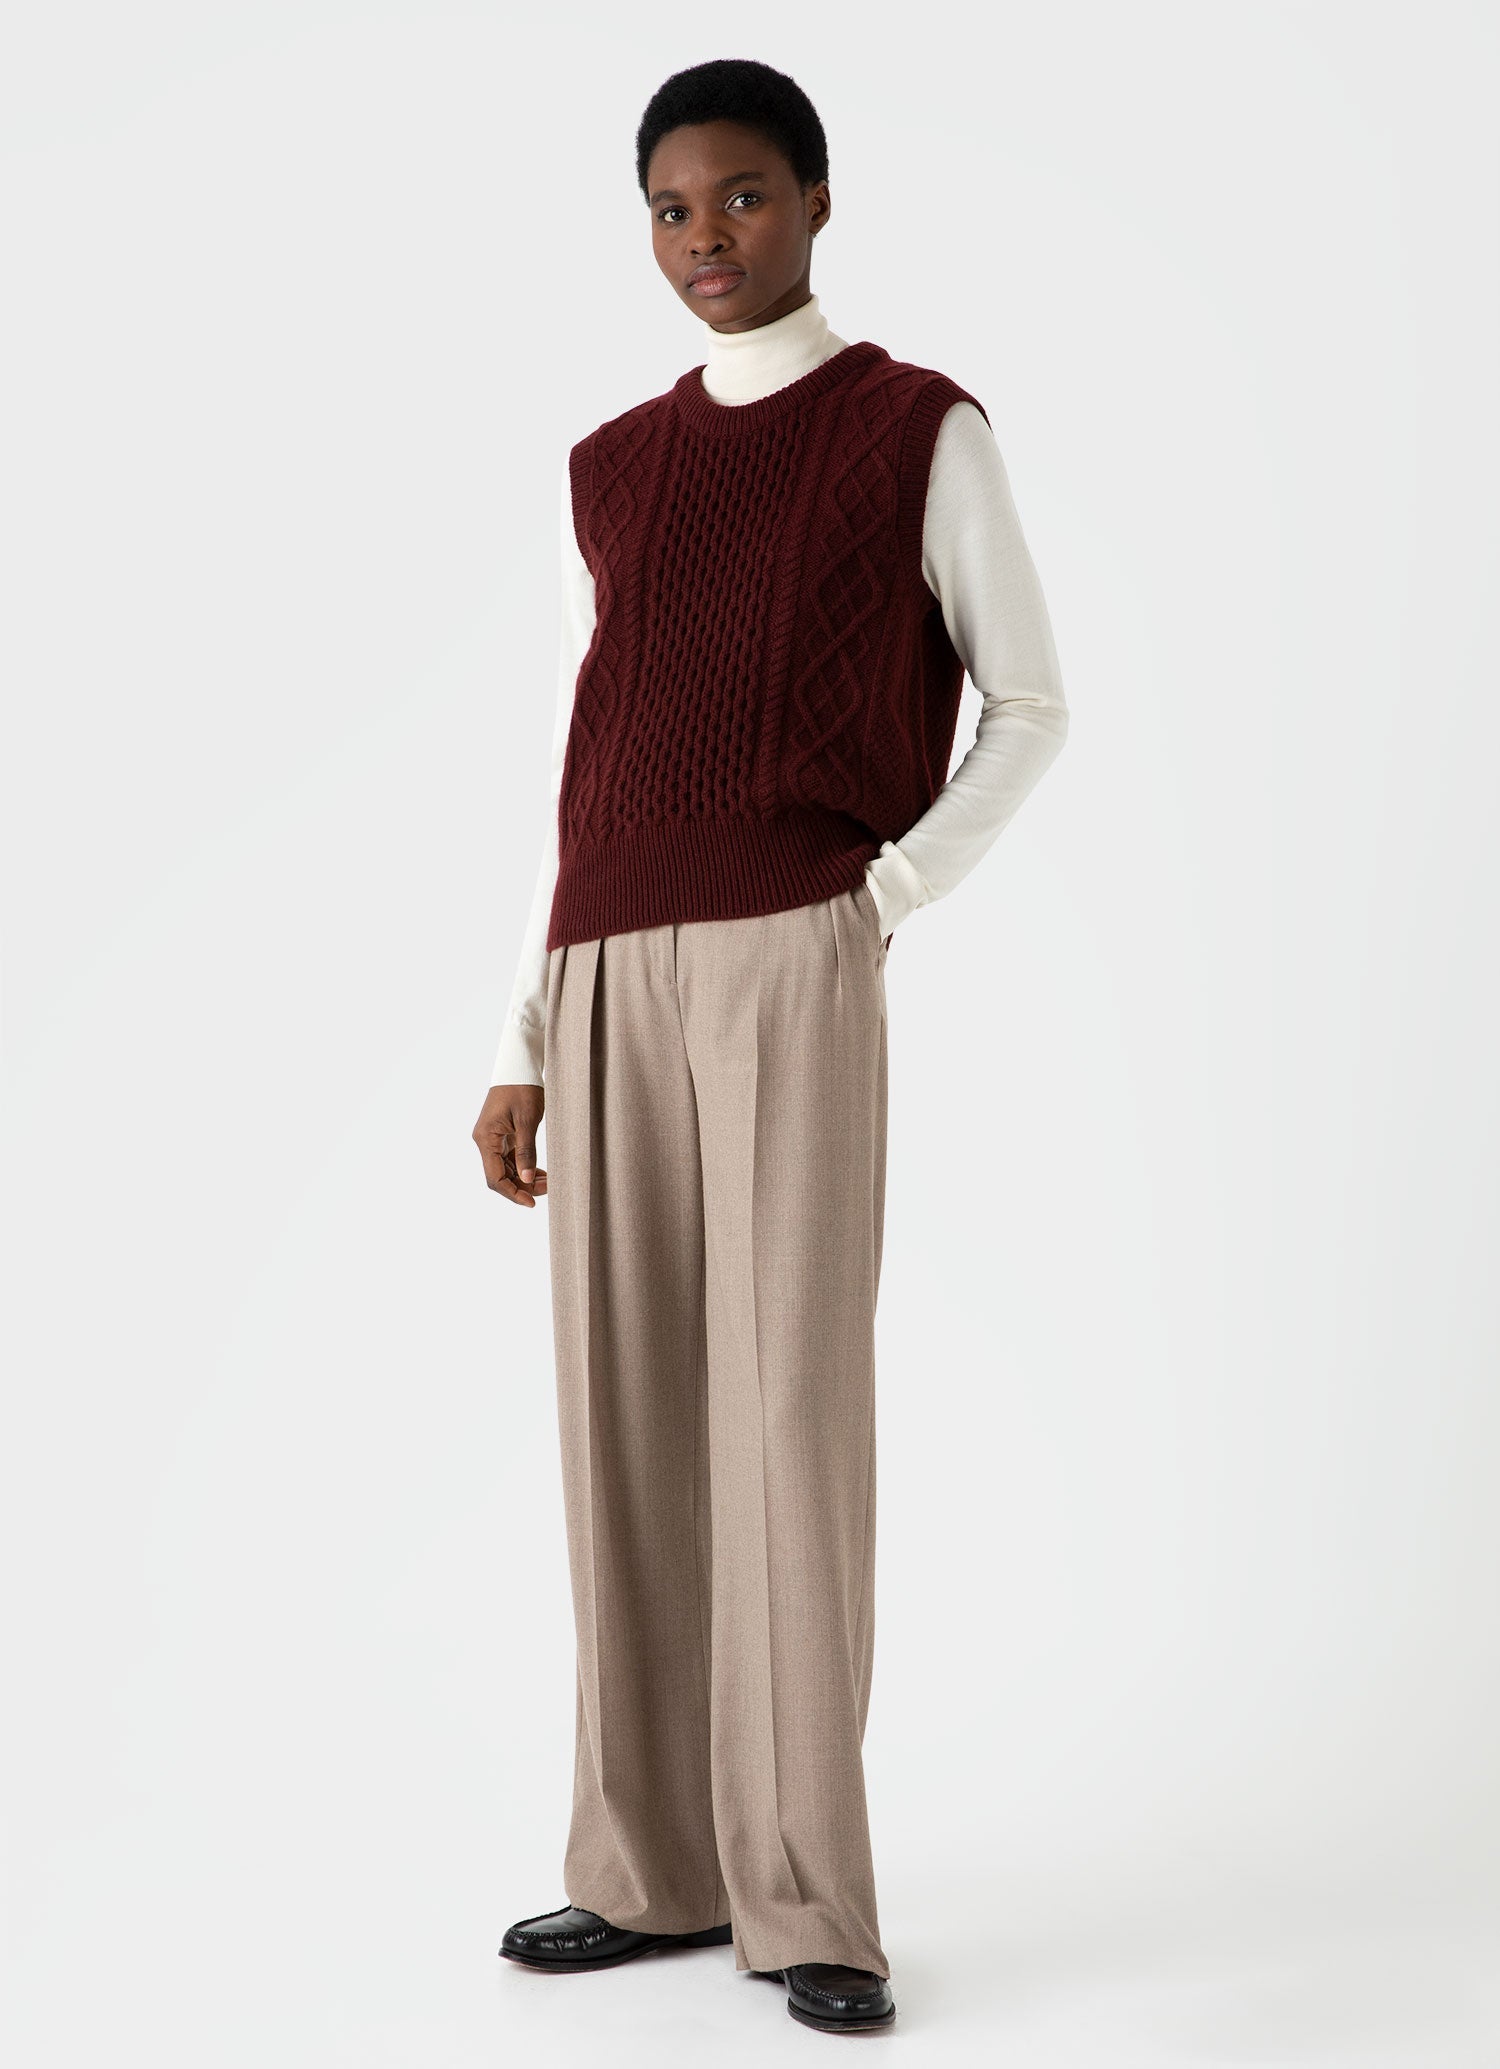 Women's Lambswool Cable Knit Vest in Maroon